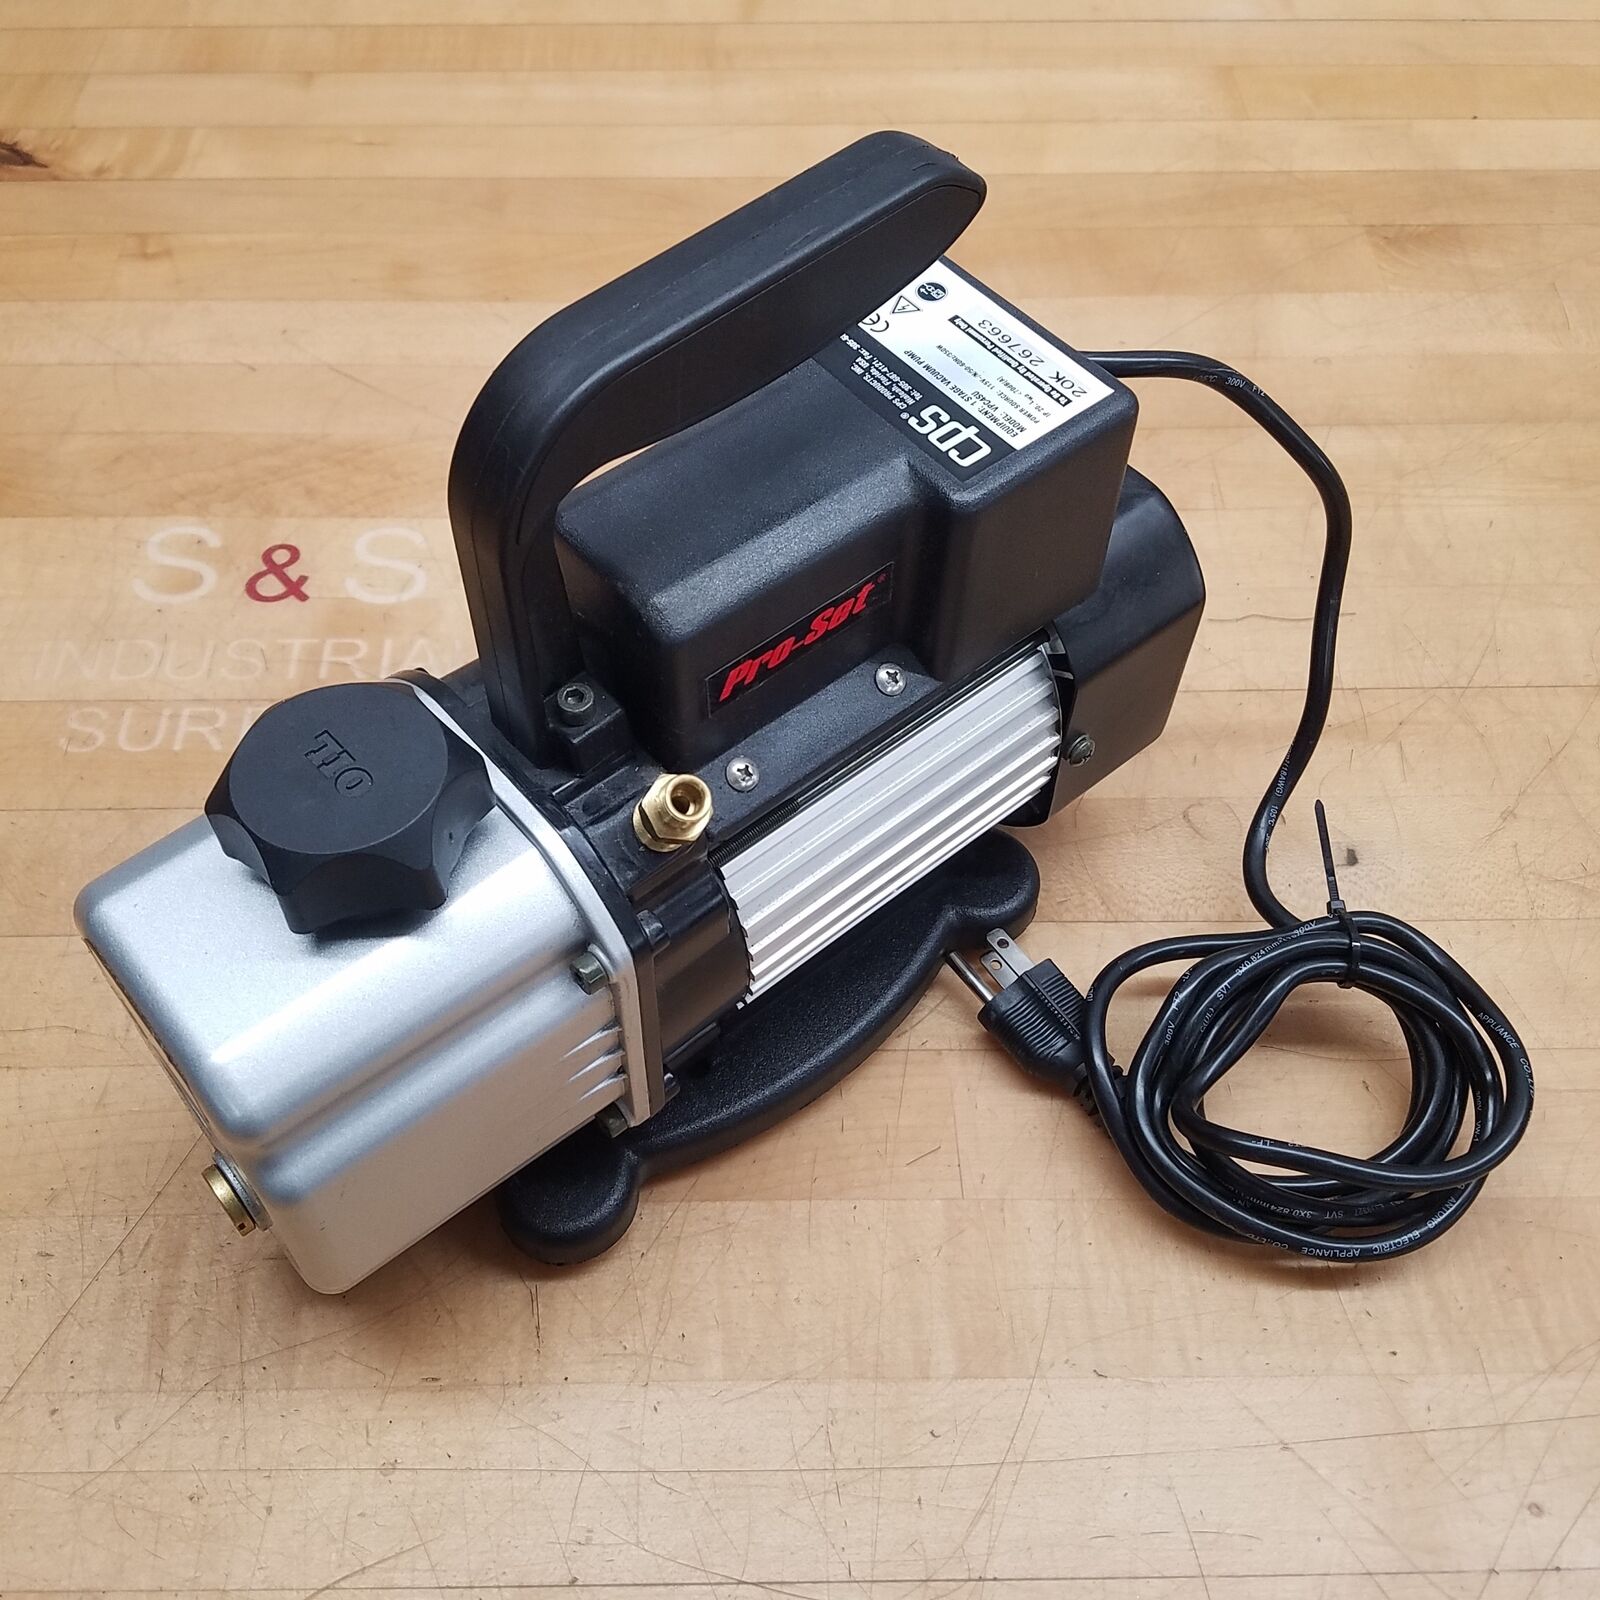 CPS Products VPC4SU Compact Vacuum Pump, 115V, 50-60Hz, 350W - USED